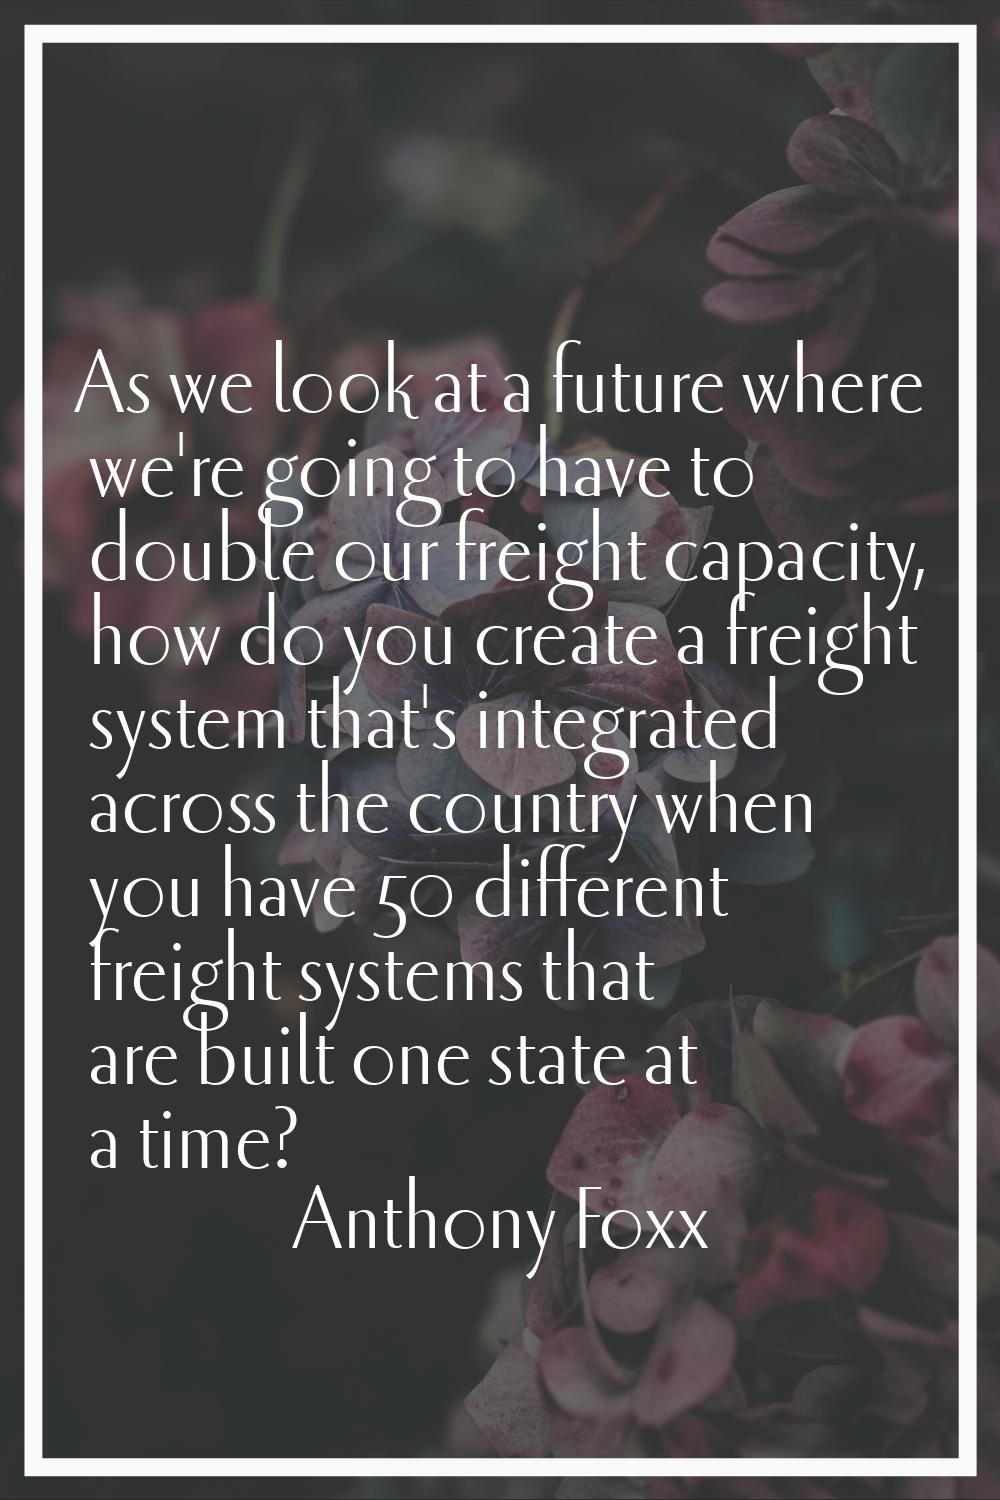 As we look at a future where we're going to have to double our freight capacity, how do you create 